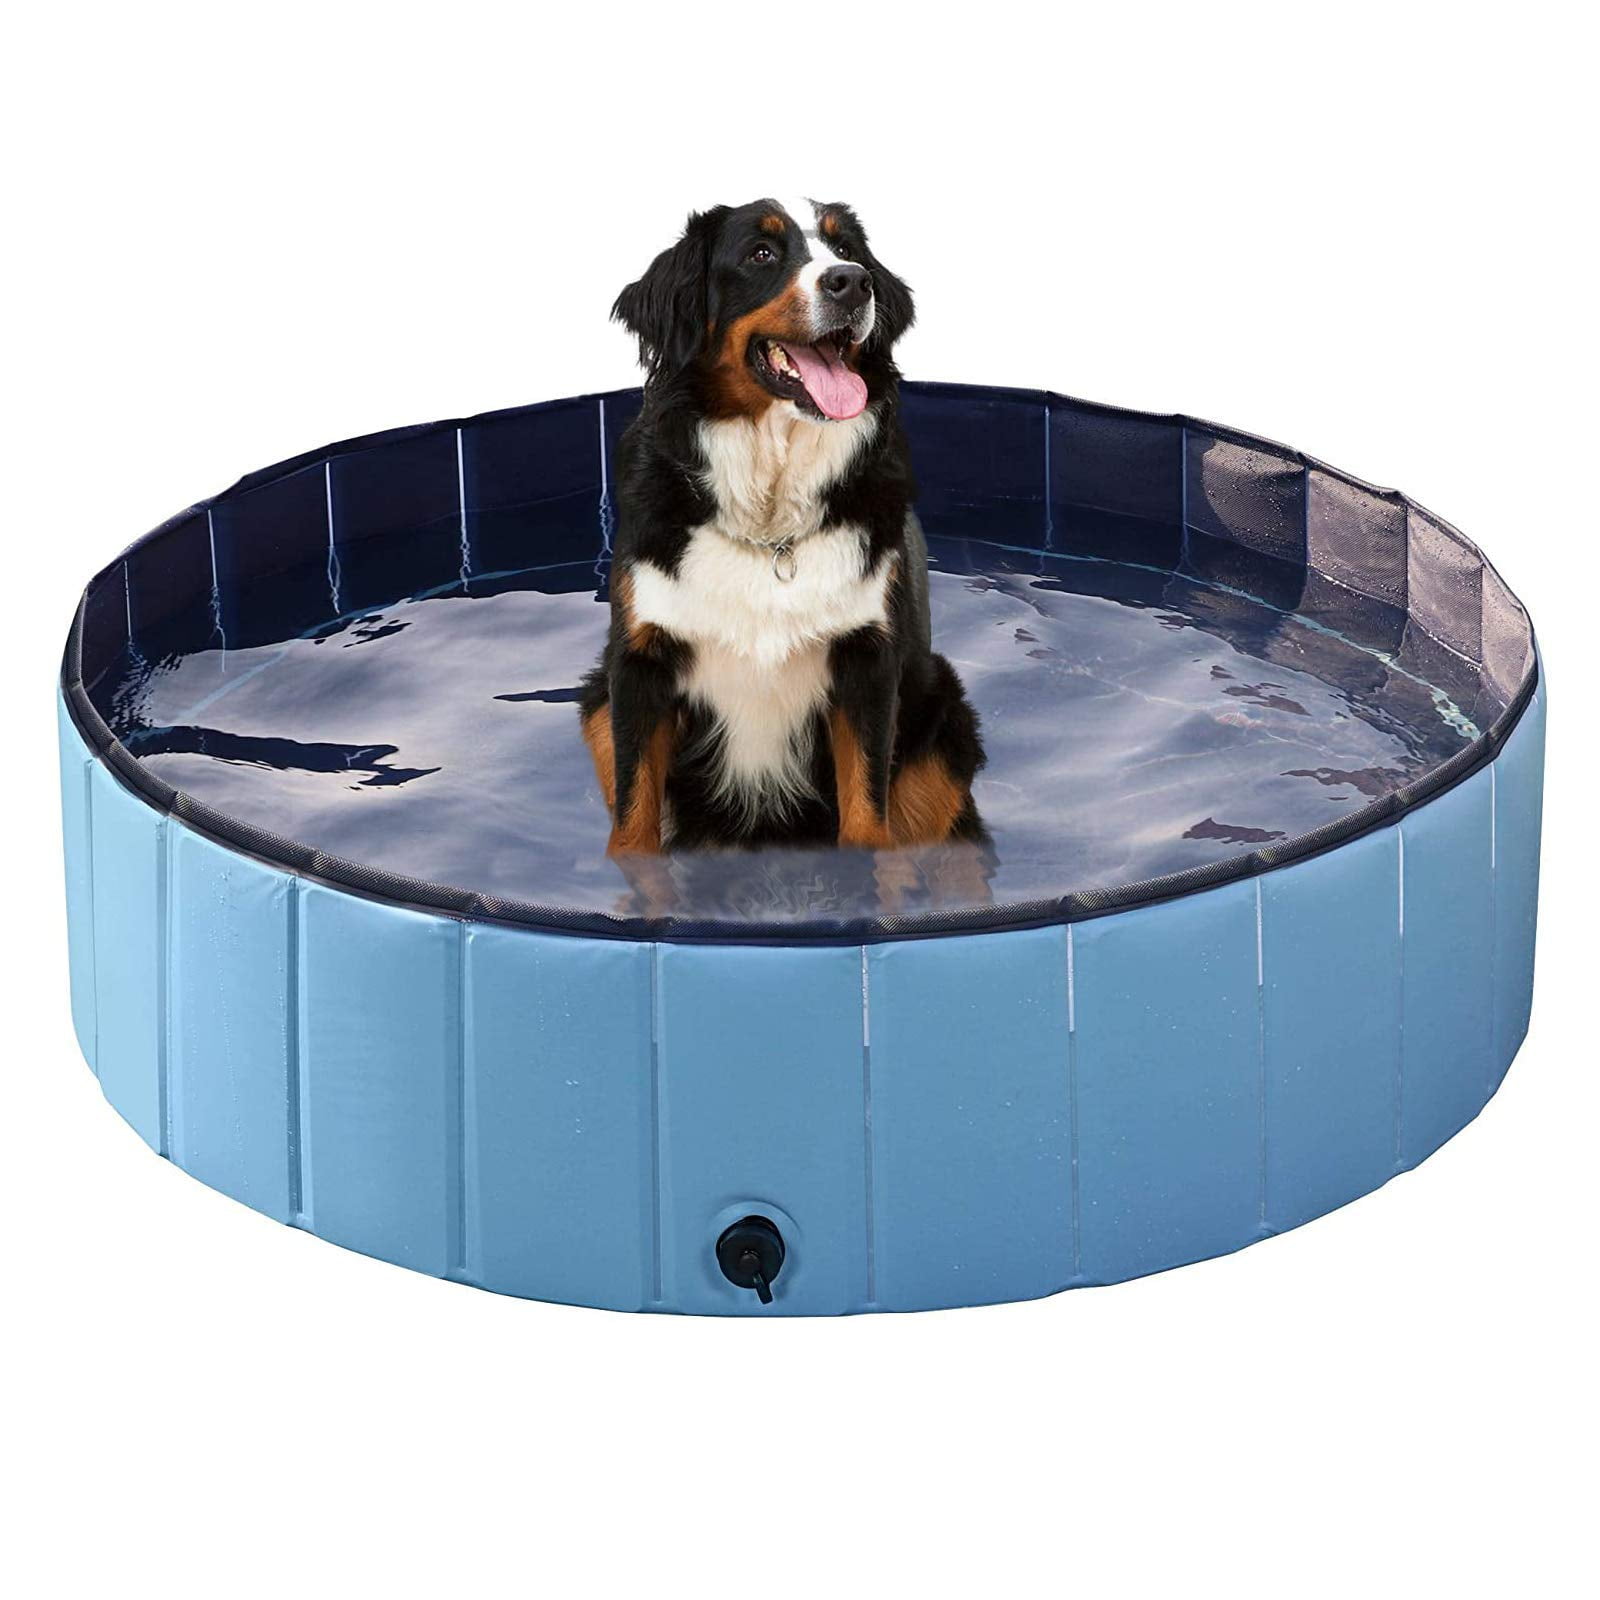 30x10cm,Blue Tekaopuer Foldable Pet Bath Dog Pool Outdoor PVC Swimming Bathing Tub Pool for Dogs and Cats and Kids Garden Extra Large Non-Slip Swimming Bathing Tub